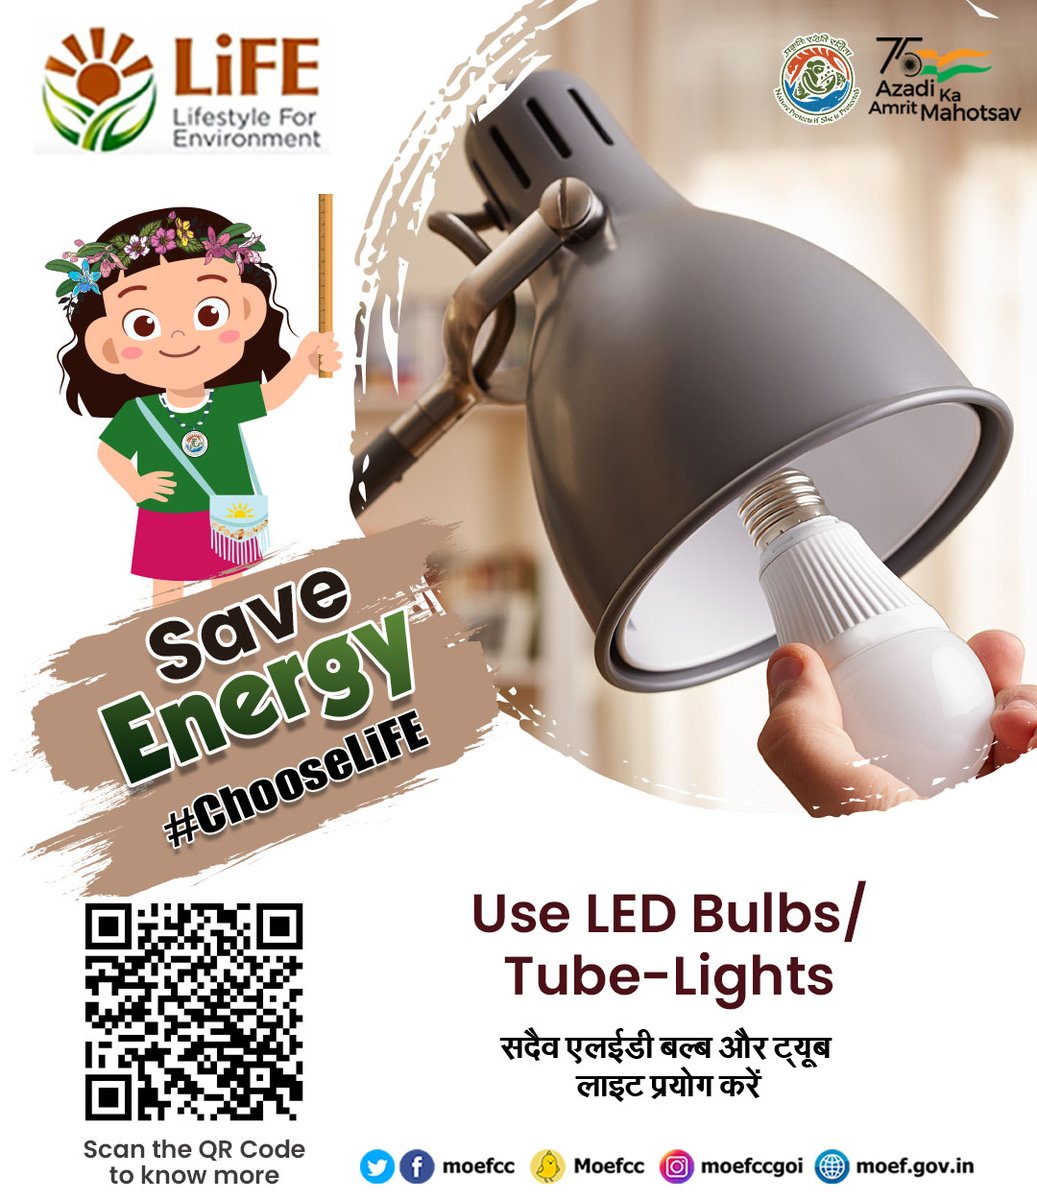 Save energy, and shape the future! Taking a small step towards energy conservation makes a big contribution. #EnergyConservation #GreenIndia #SaveEnergy @MIB_India @moefcc